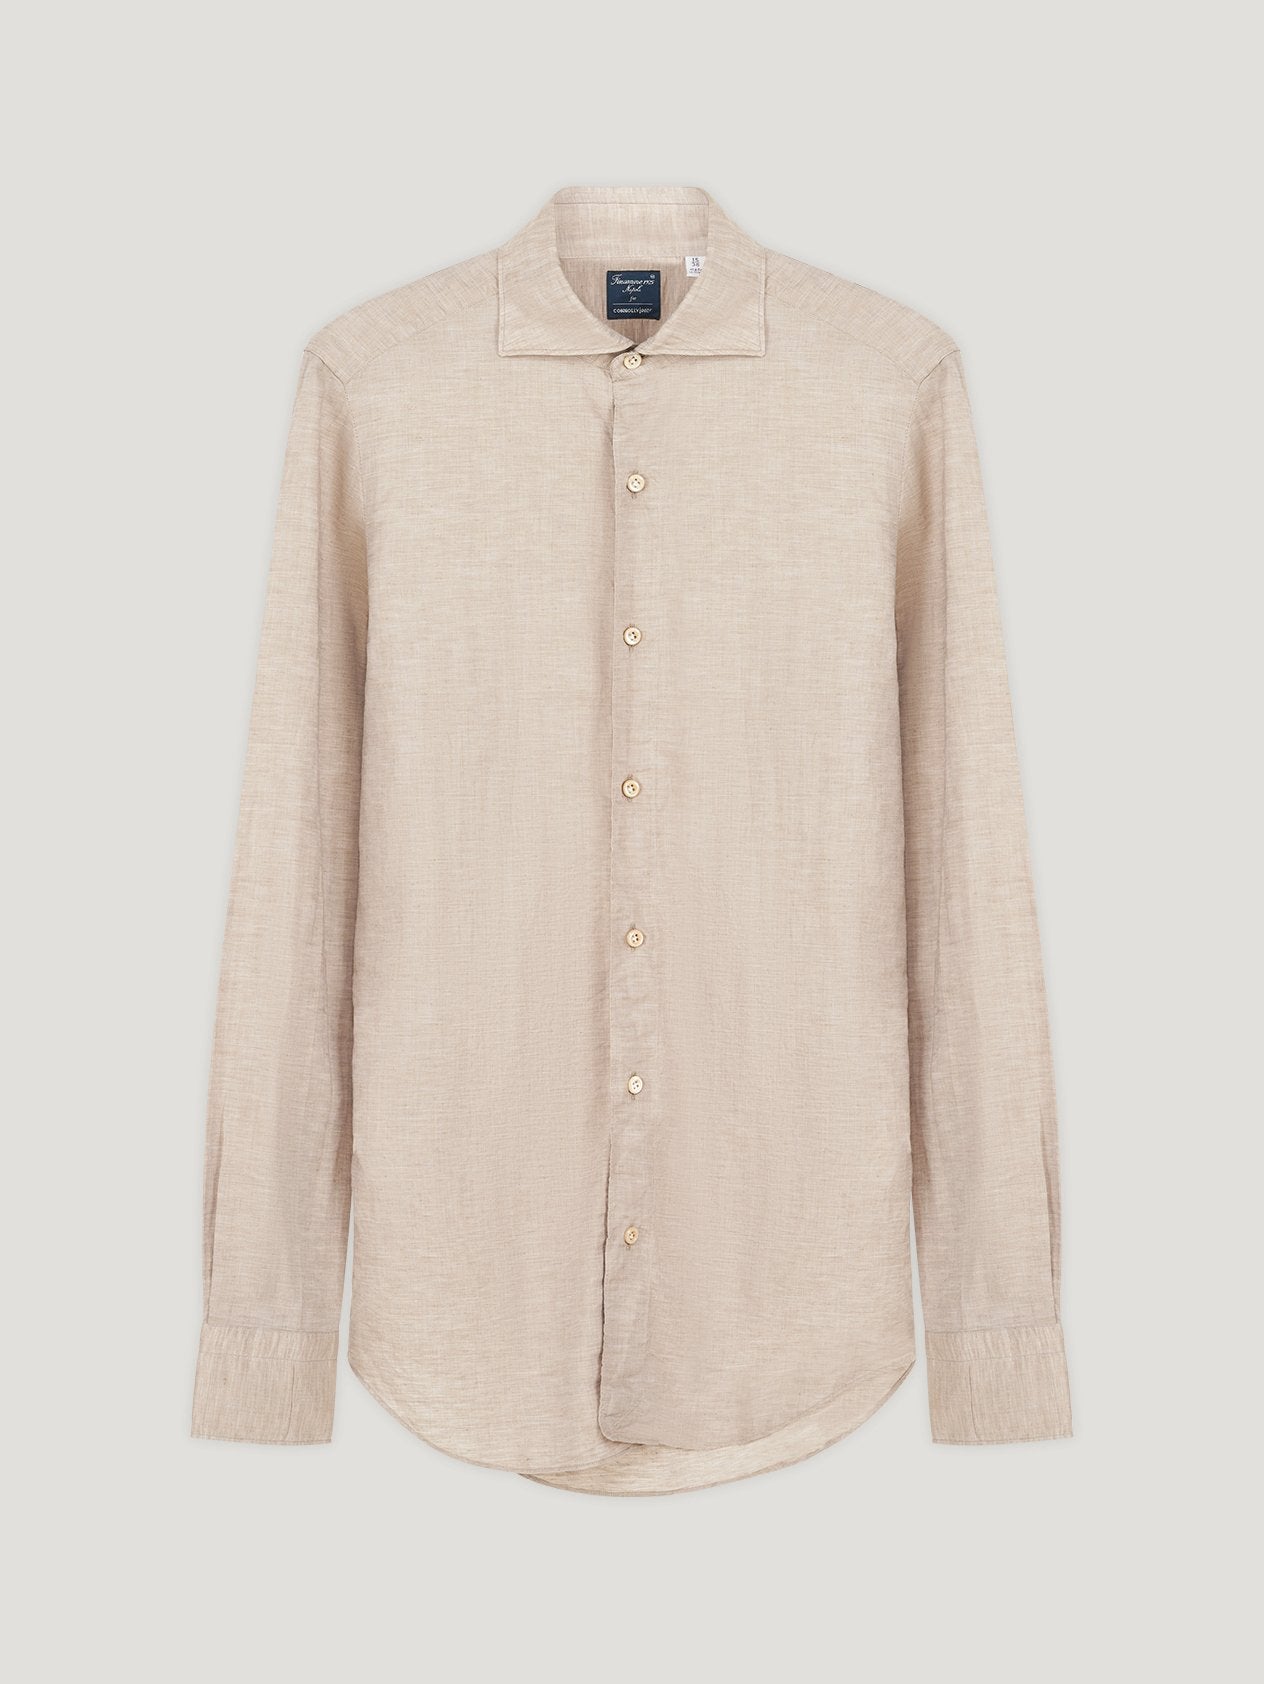 Connolly No Time To Die Oatmeal Linen Shirt